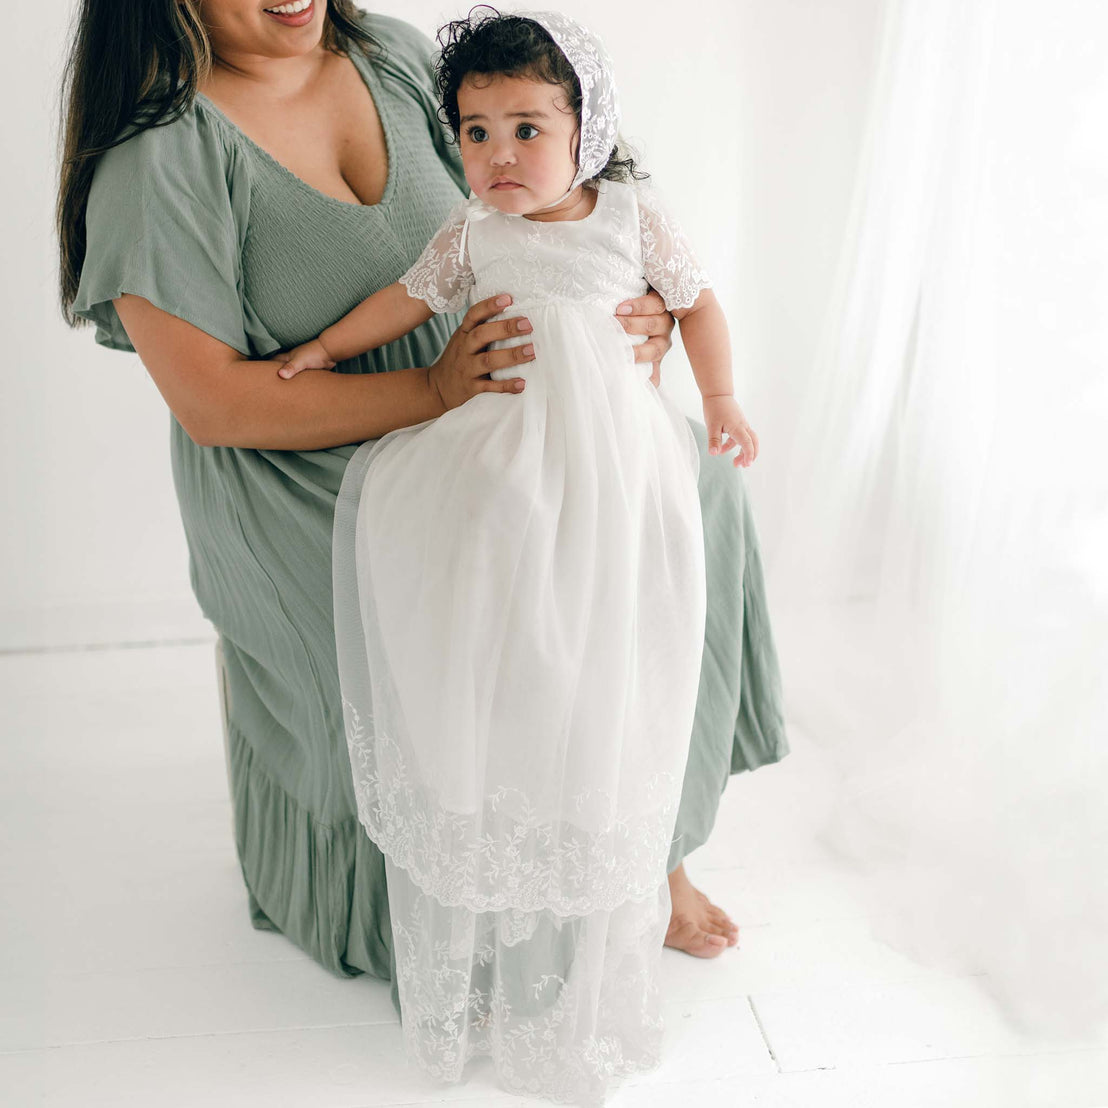 A woman in a green dress holds a baby dressed in an Ella Christening Gown with vintage heirloom style. The Ella Christening Gown, featuring embroidered netting lace, is complemented by a matching bonnet. They are standing in a minimalistic, white room with a light and airy atmosphere.